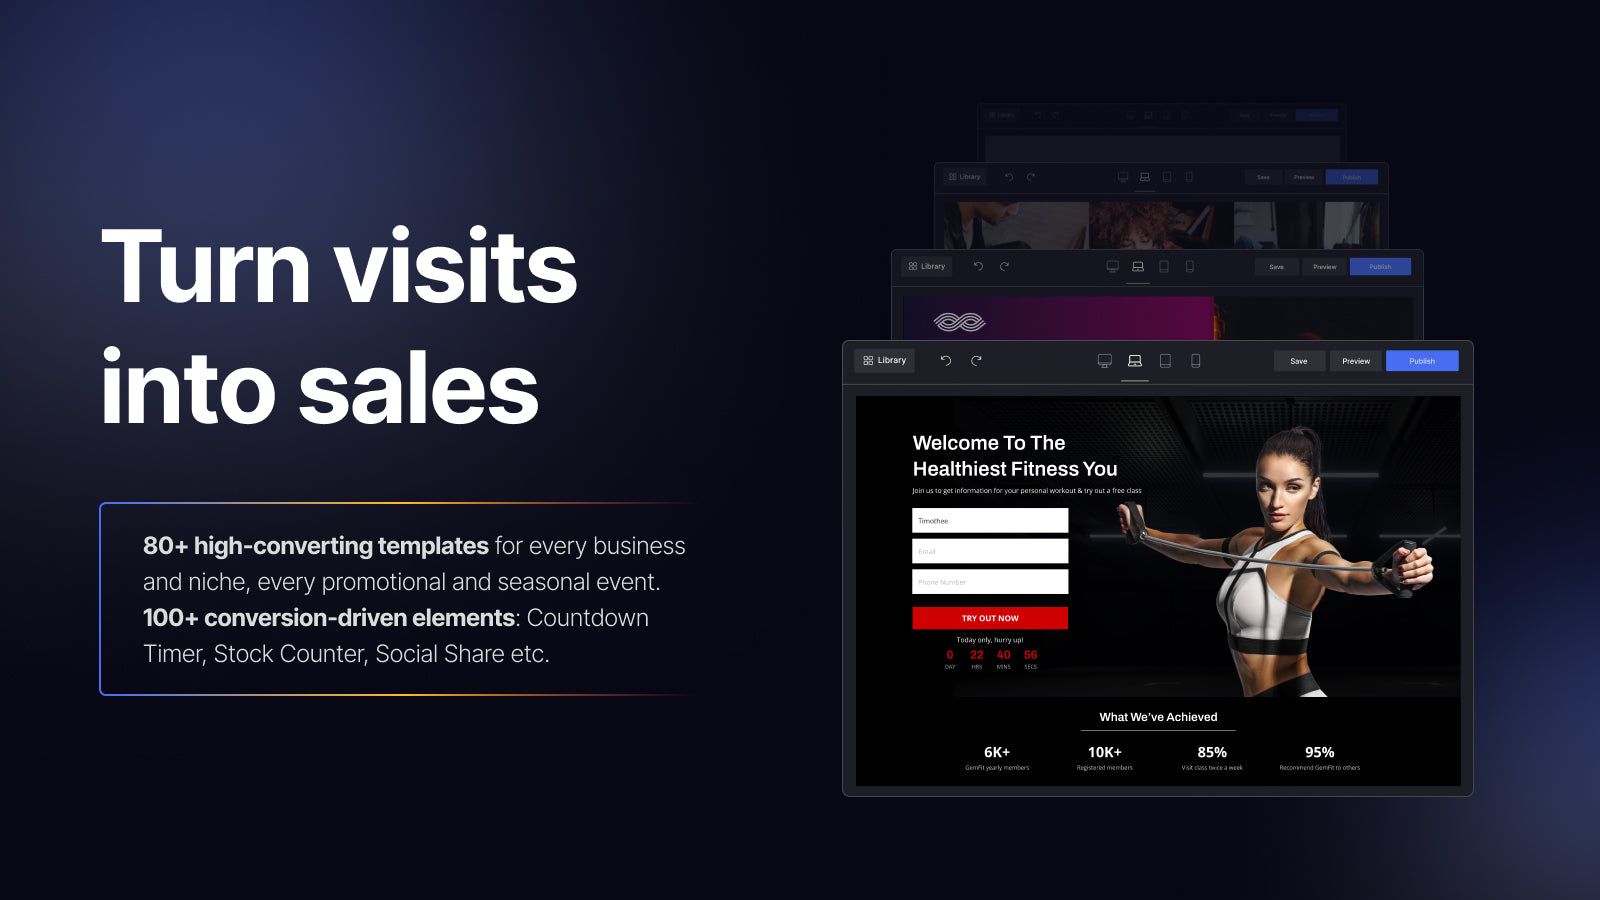 Turn visits into sales